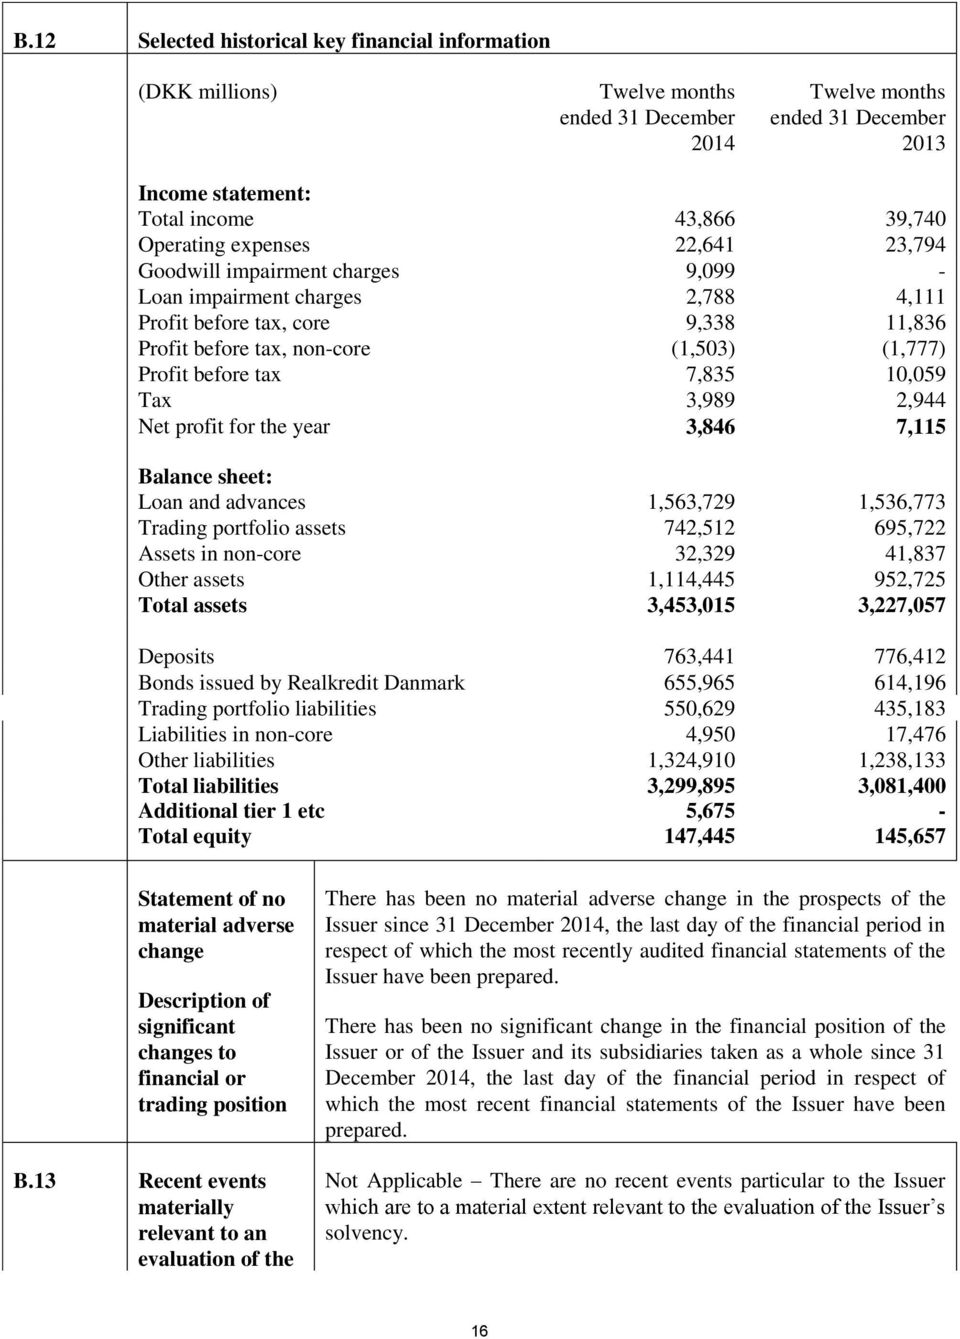 10,059 Tax 3,989 2,944 Net profit for the year 3,846 7,115 Balance sheet: Loan and advances 1,563,729 1,536,773 Trading portfolio assets 742,512 695,722 Assets in non-core 32,329 41,837 Other assets